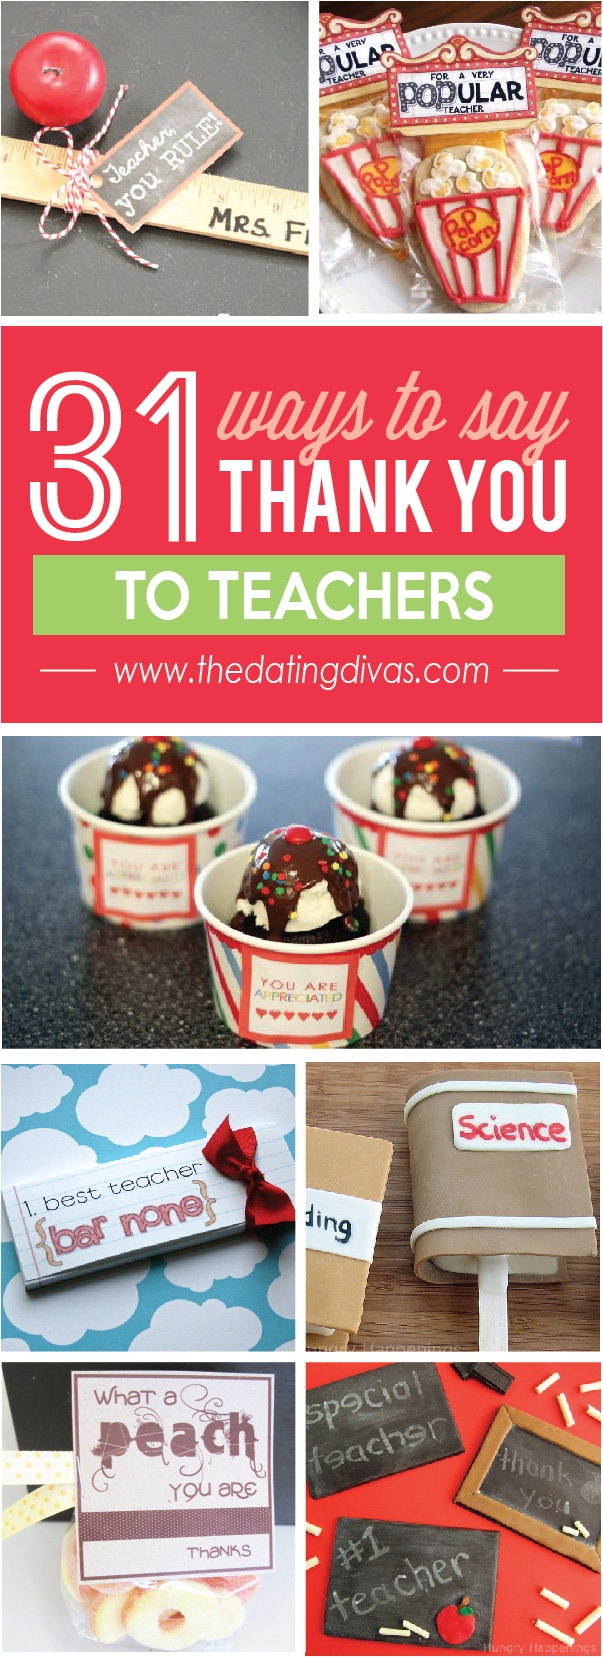 31 ways to say Thank You to a Teacher